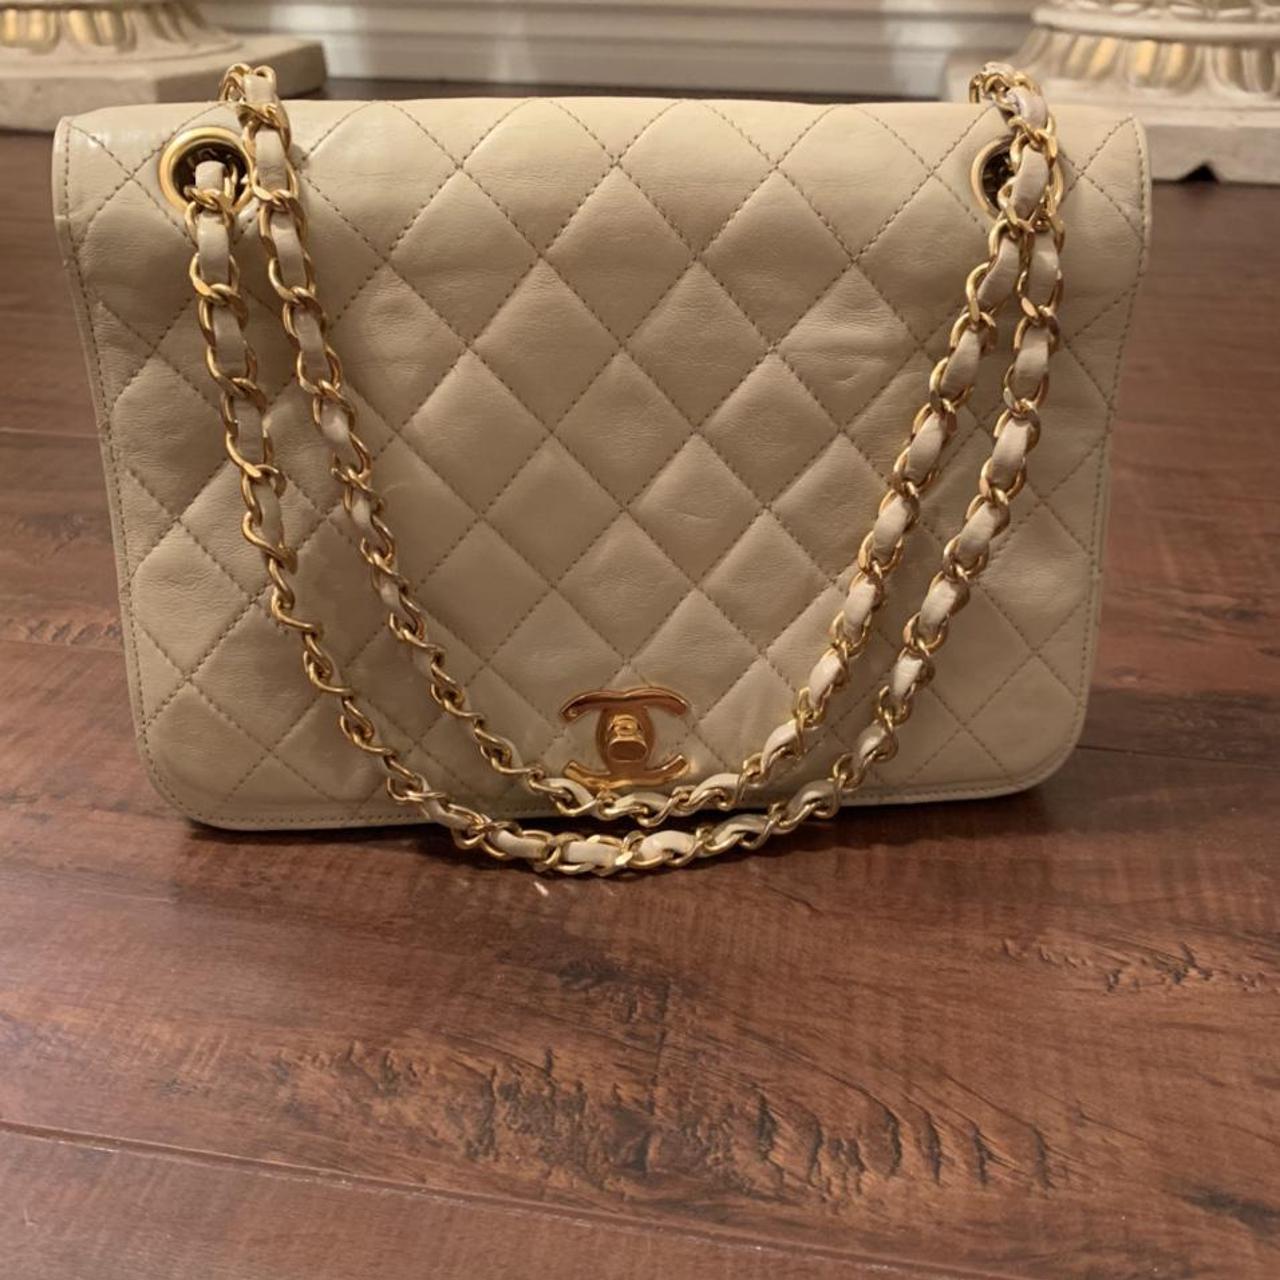 Authentic Chanel Classic Bag Vintage, ivory, good